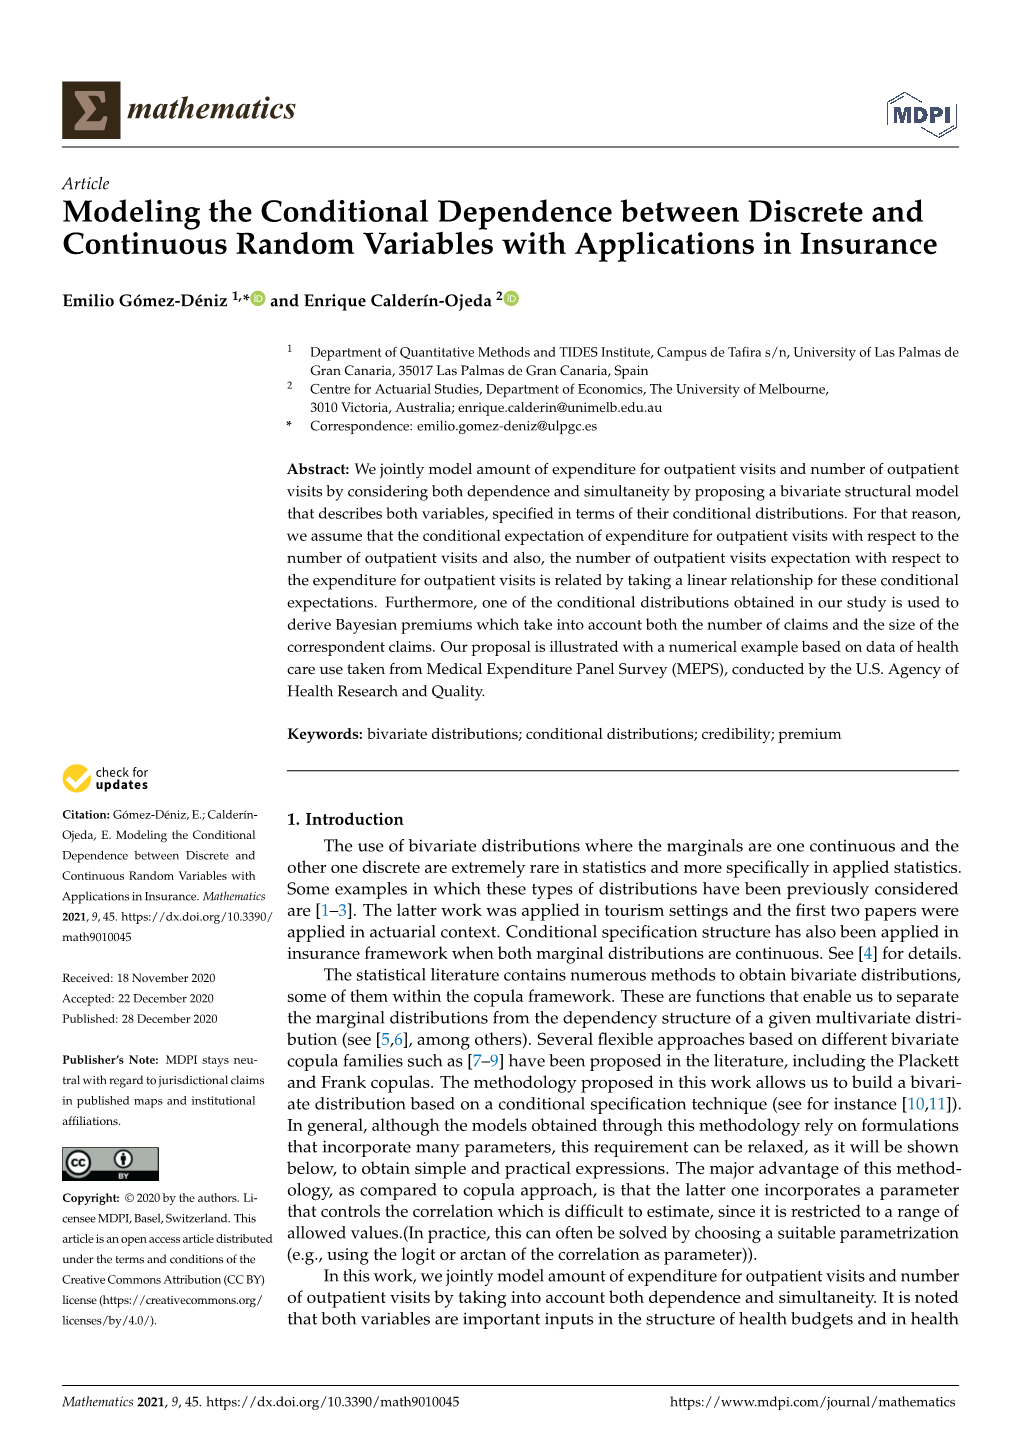 Modeling the Conditional Dependence Between Discrete and Continuous Random Variables with Applications in Insurance